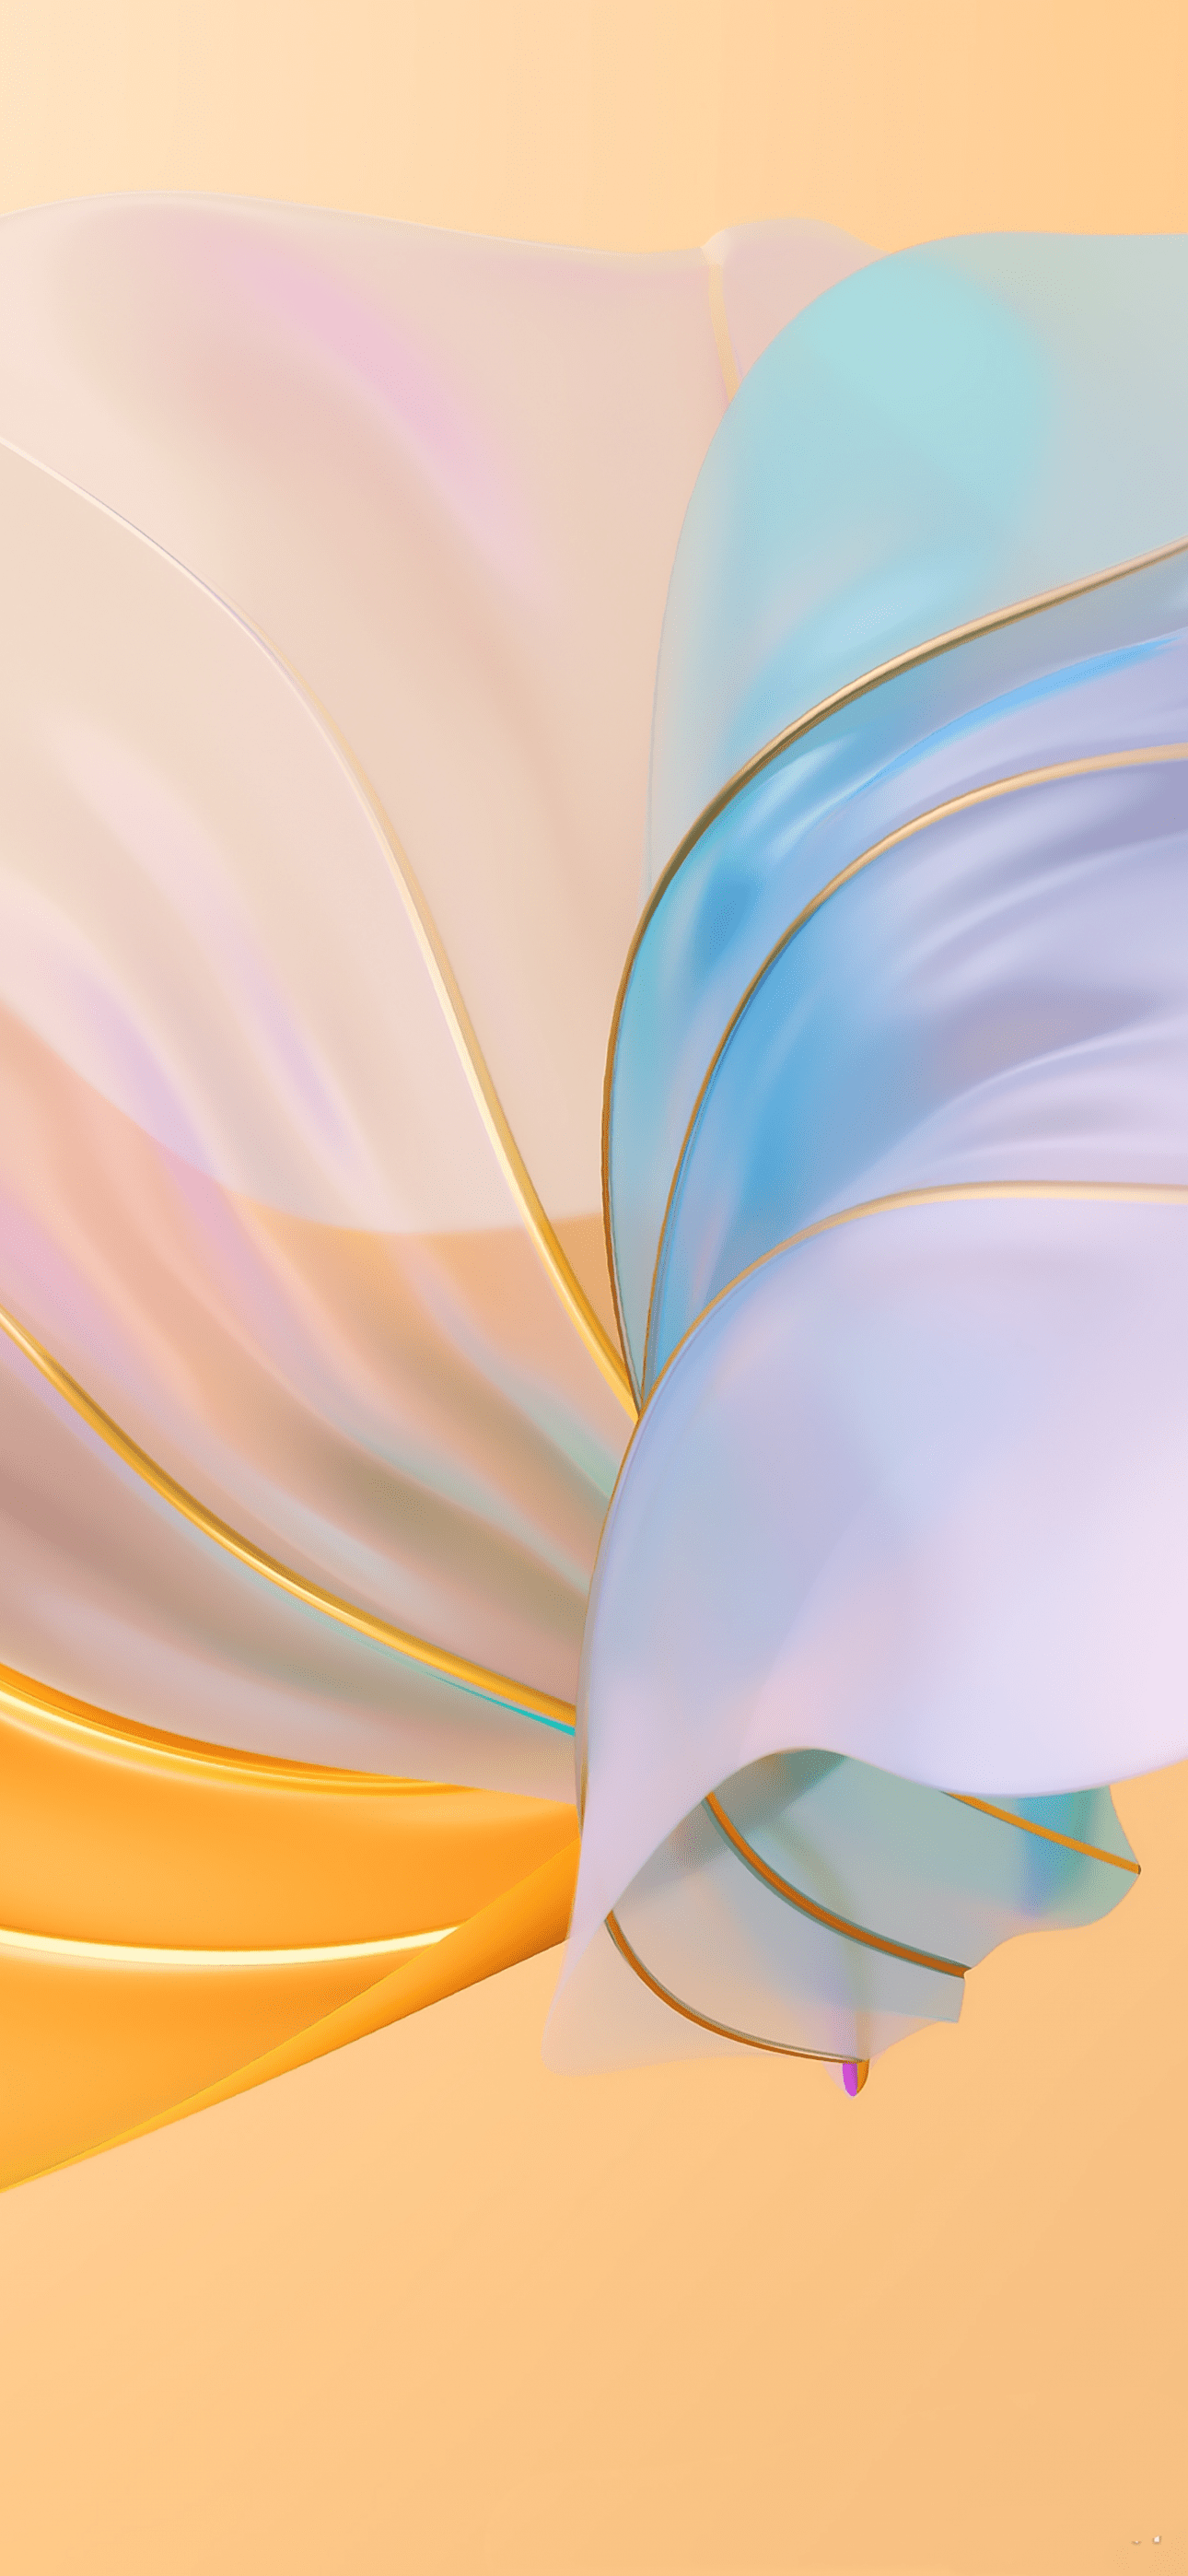 A colorful image of fabric on an orange background - Colorful